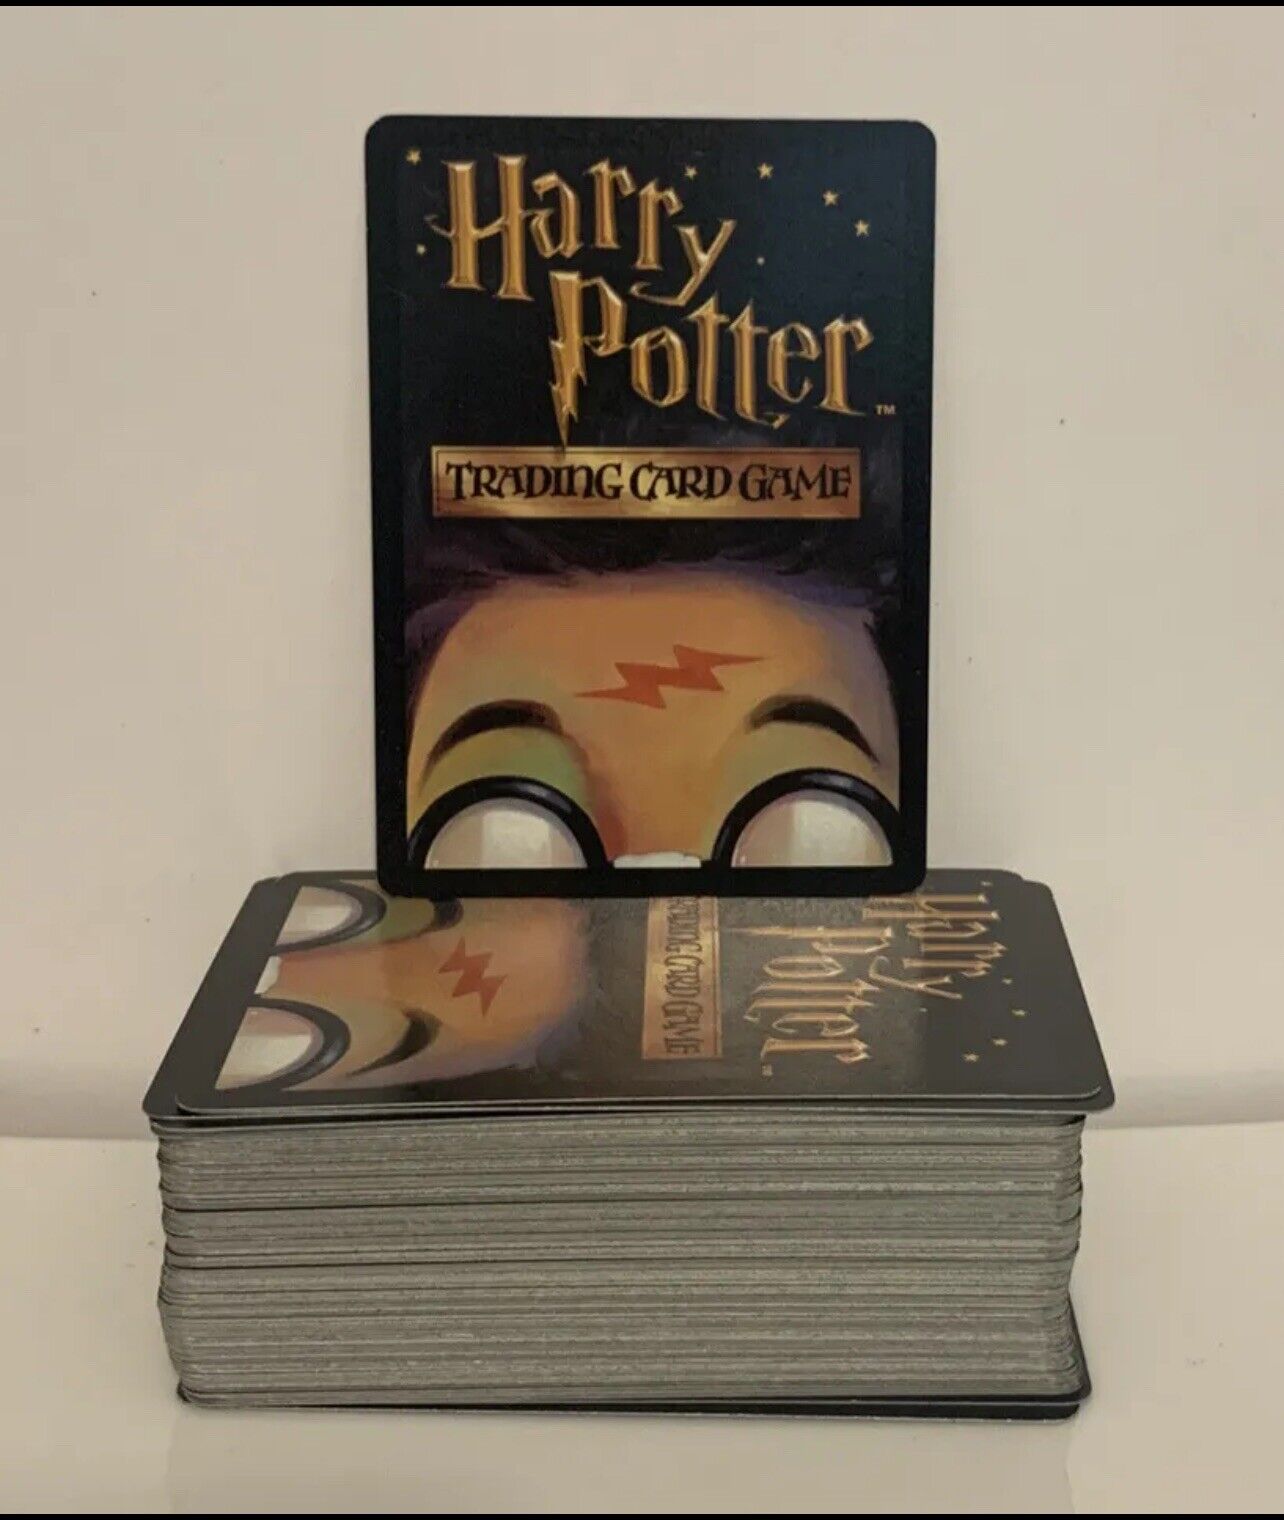 Lot of 100 Assorted Harry Potter Trading Card Game Cards Wizards Warner Bro 2012